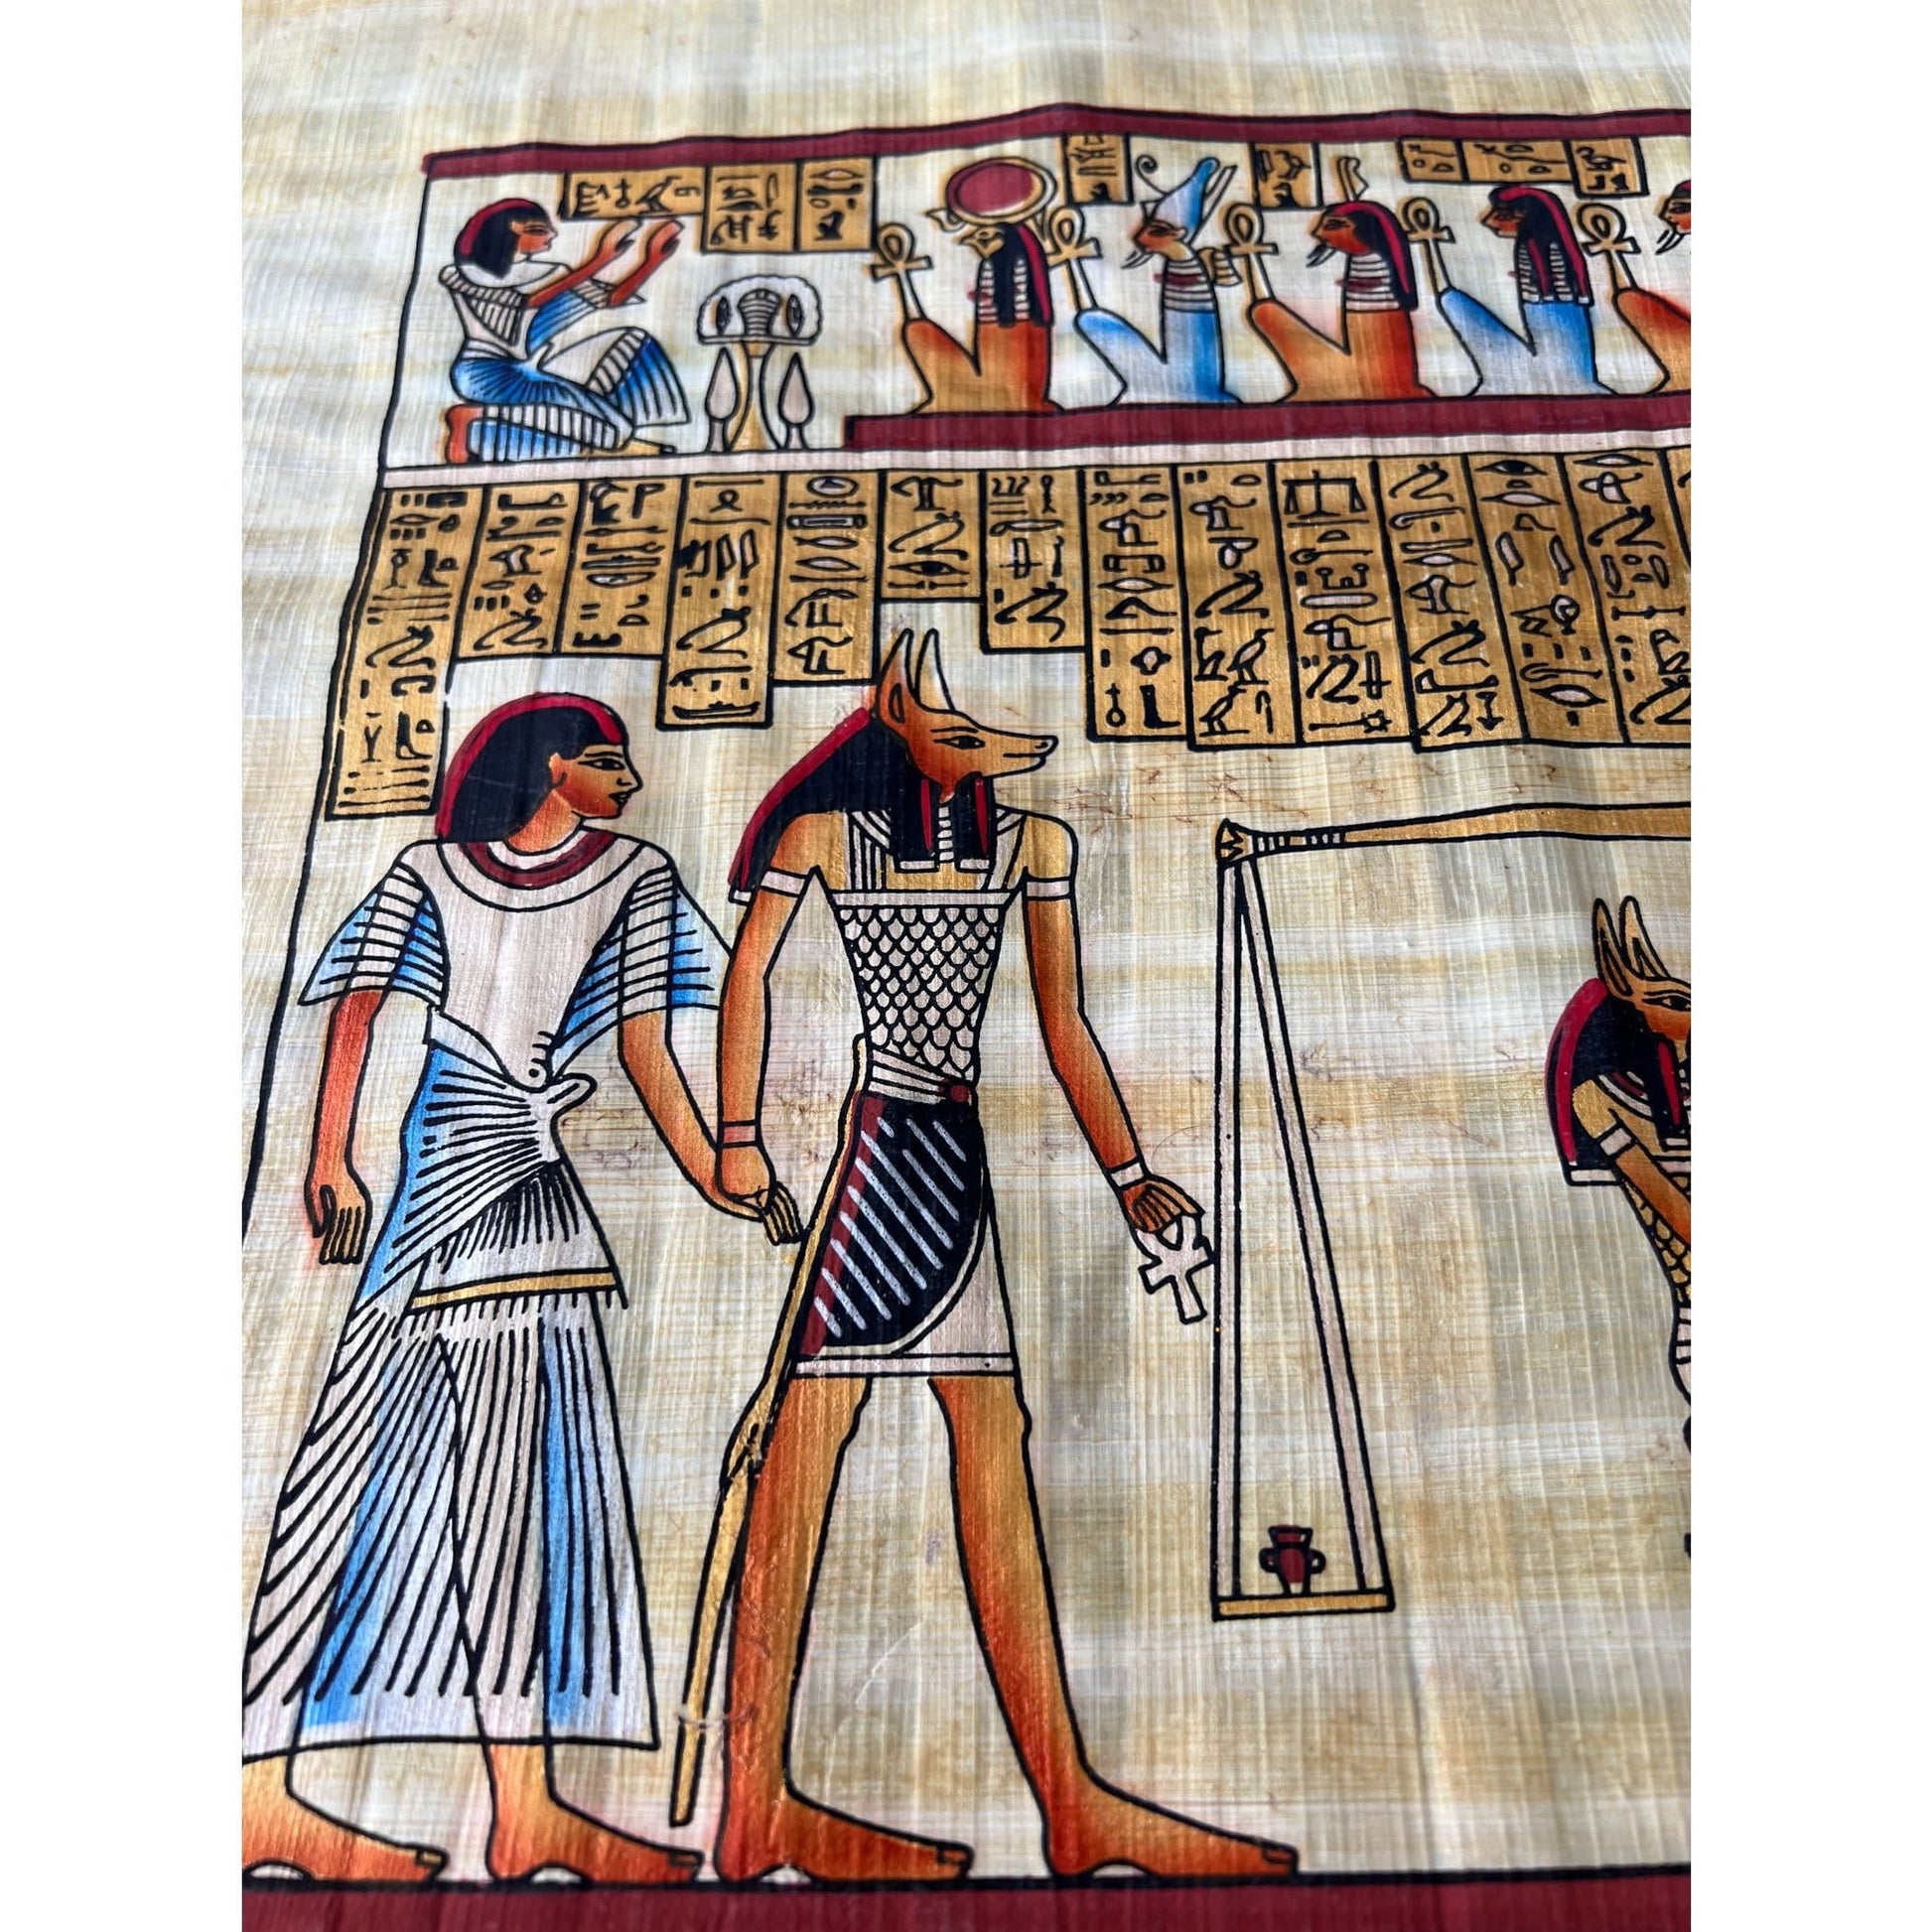 Last Judgement of Hunefer from His Tomb, Book of The Dead, Extra Large Rectangle Egyptian Papyrus Painting Wall Decor